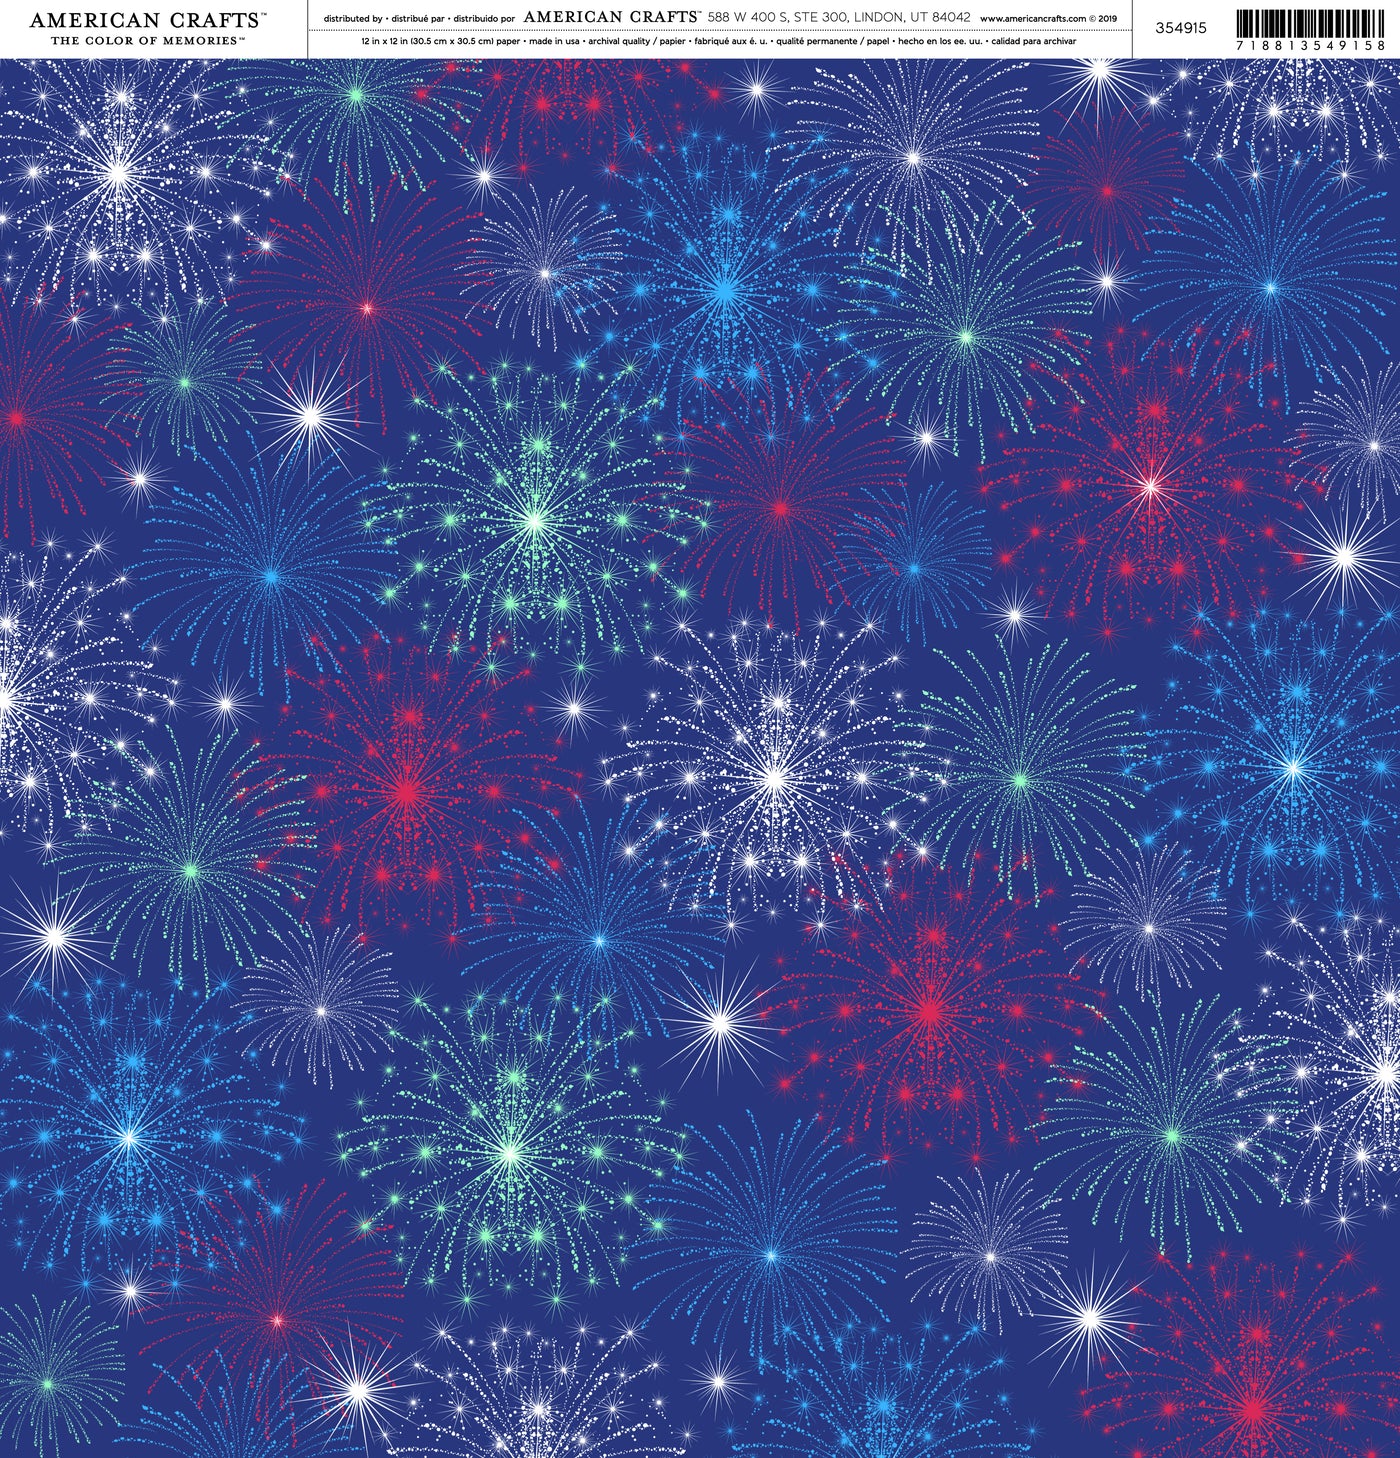 Multi-Colored (red, white, and blue fireworks on a navy blue background)